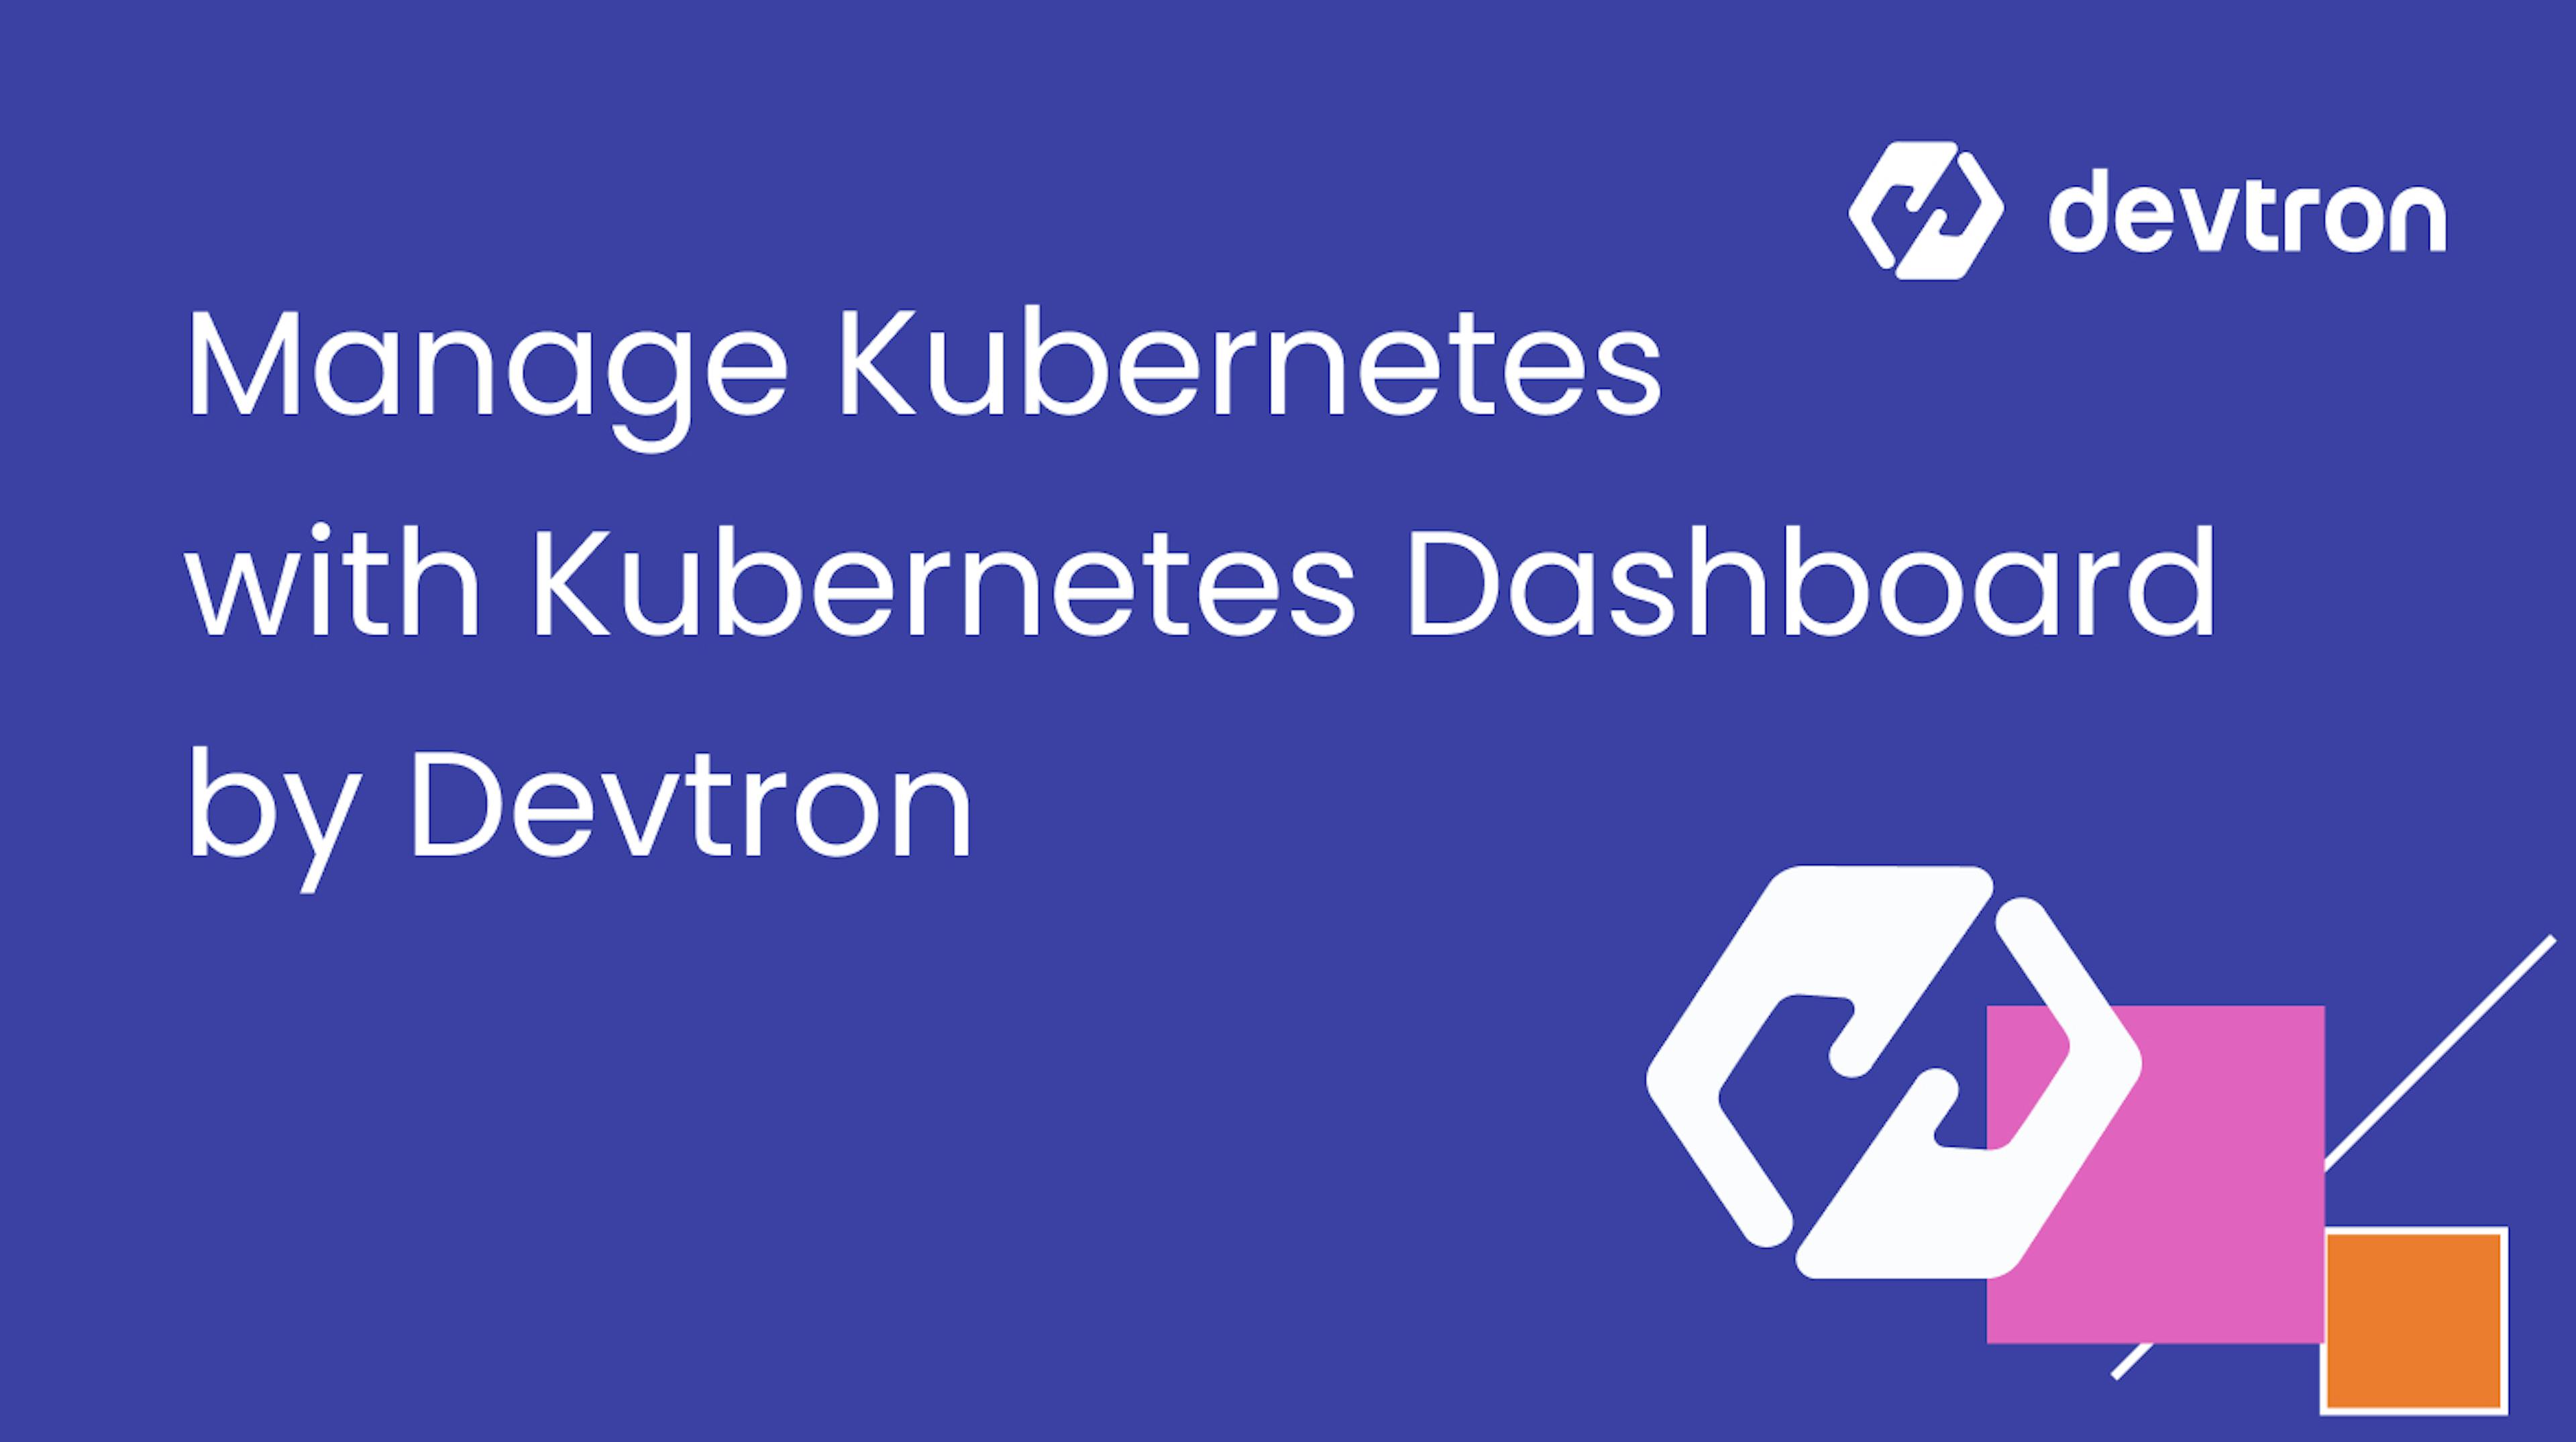 featured image - How to Manage Kubernetes like a Pro with Kubernetes Dashboard by Devtron